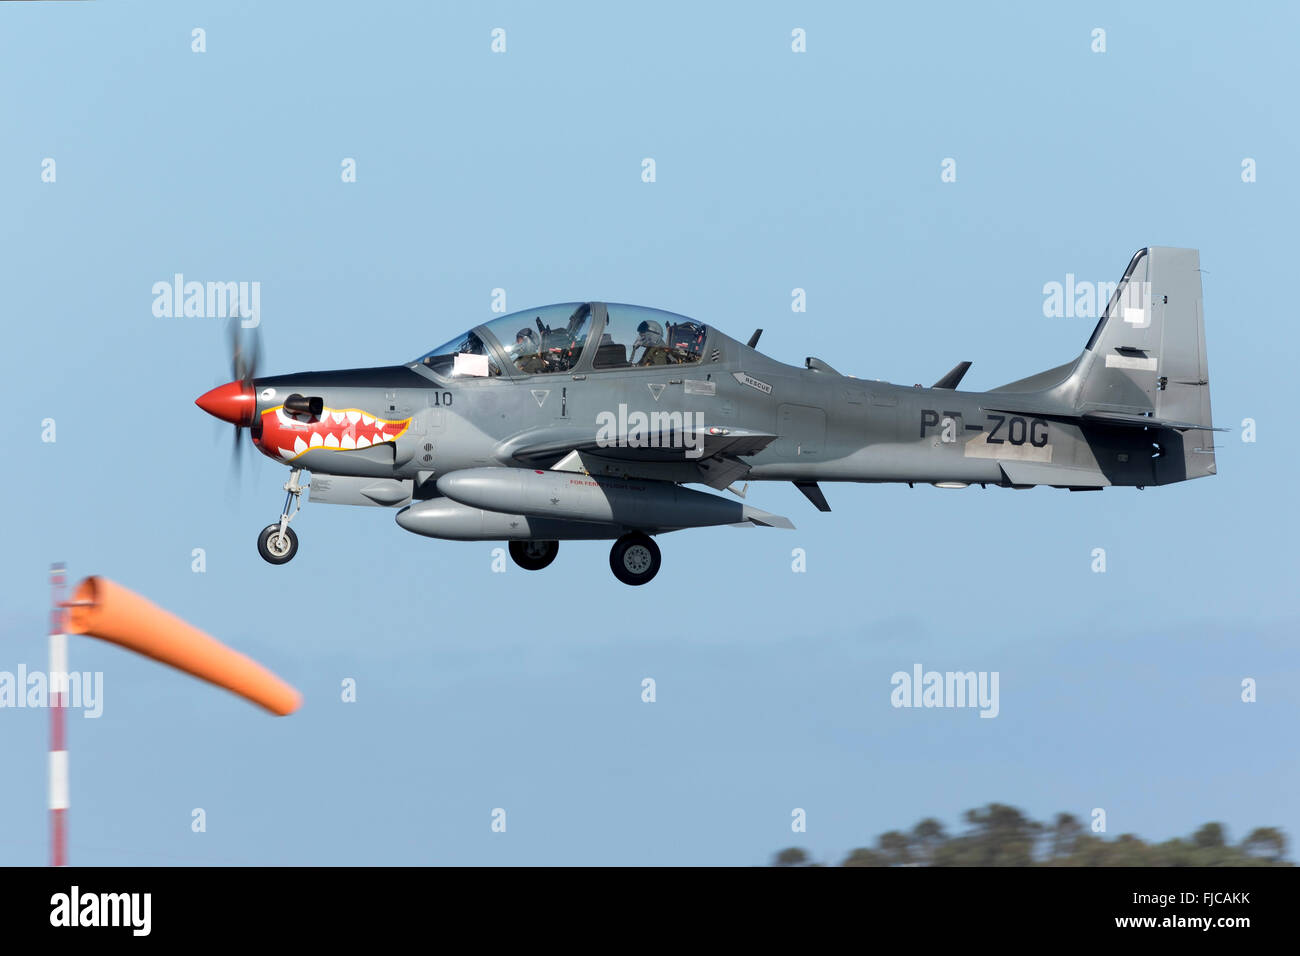 Indonesian Air Force Embraer EMB-314 Super Tucano landing in Malta on a technical stop, on ferry flight all the way from Brazil Stock Photo